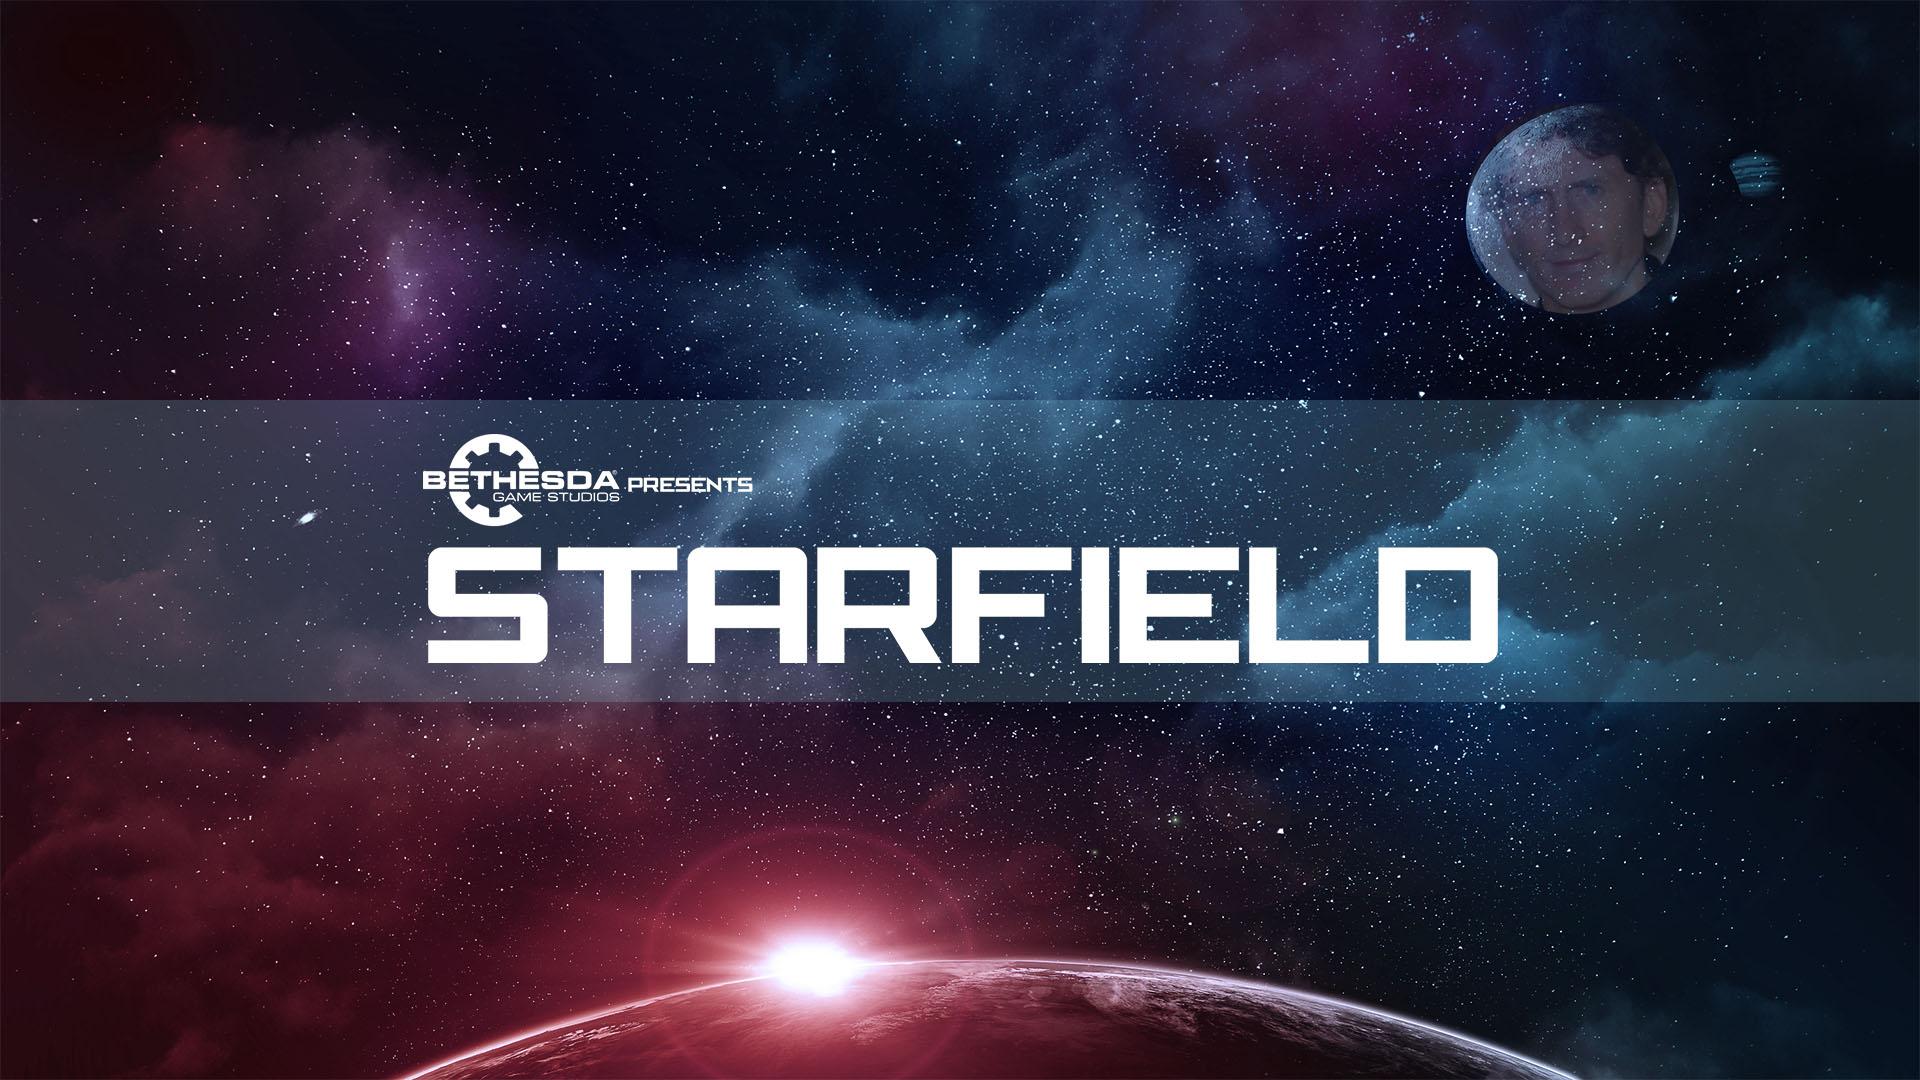 Wallpaper, video games, Bethesda Softworks, Video Game Art, STARFIELD the game 1920x1080